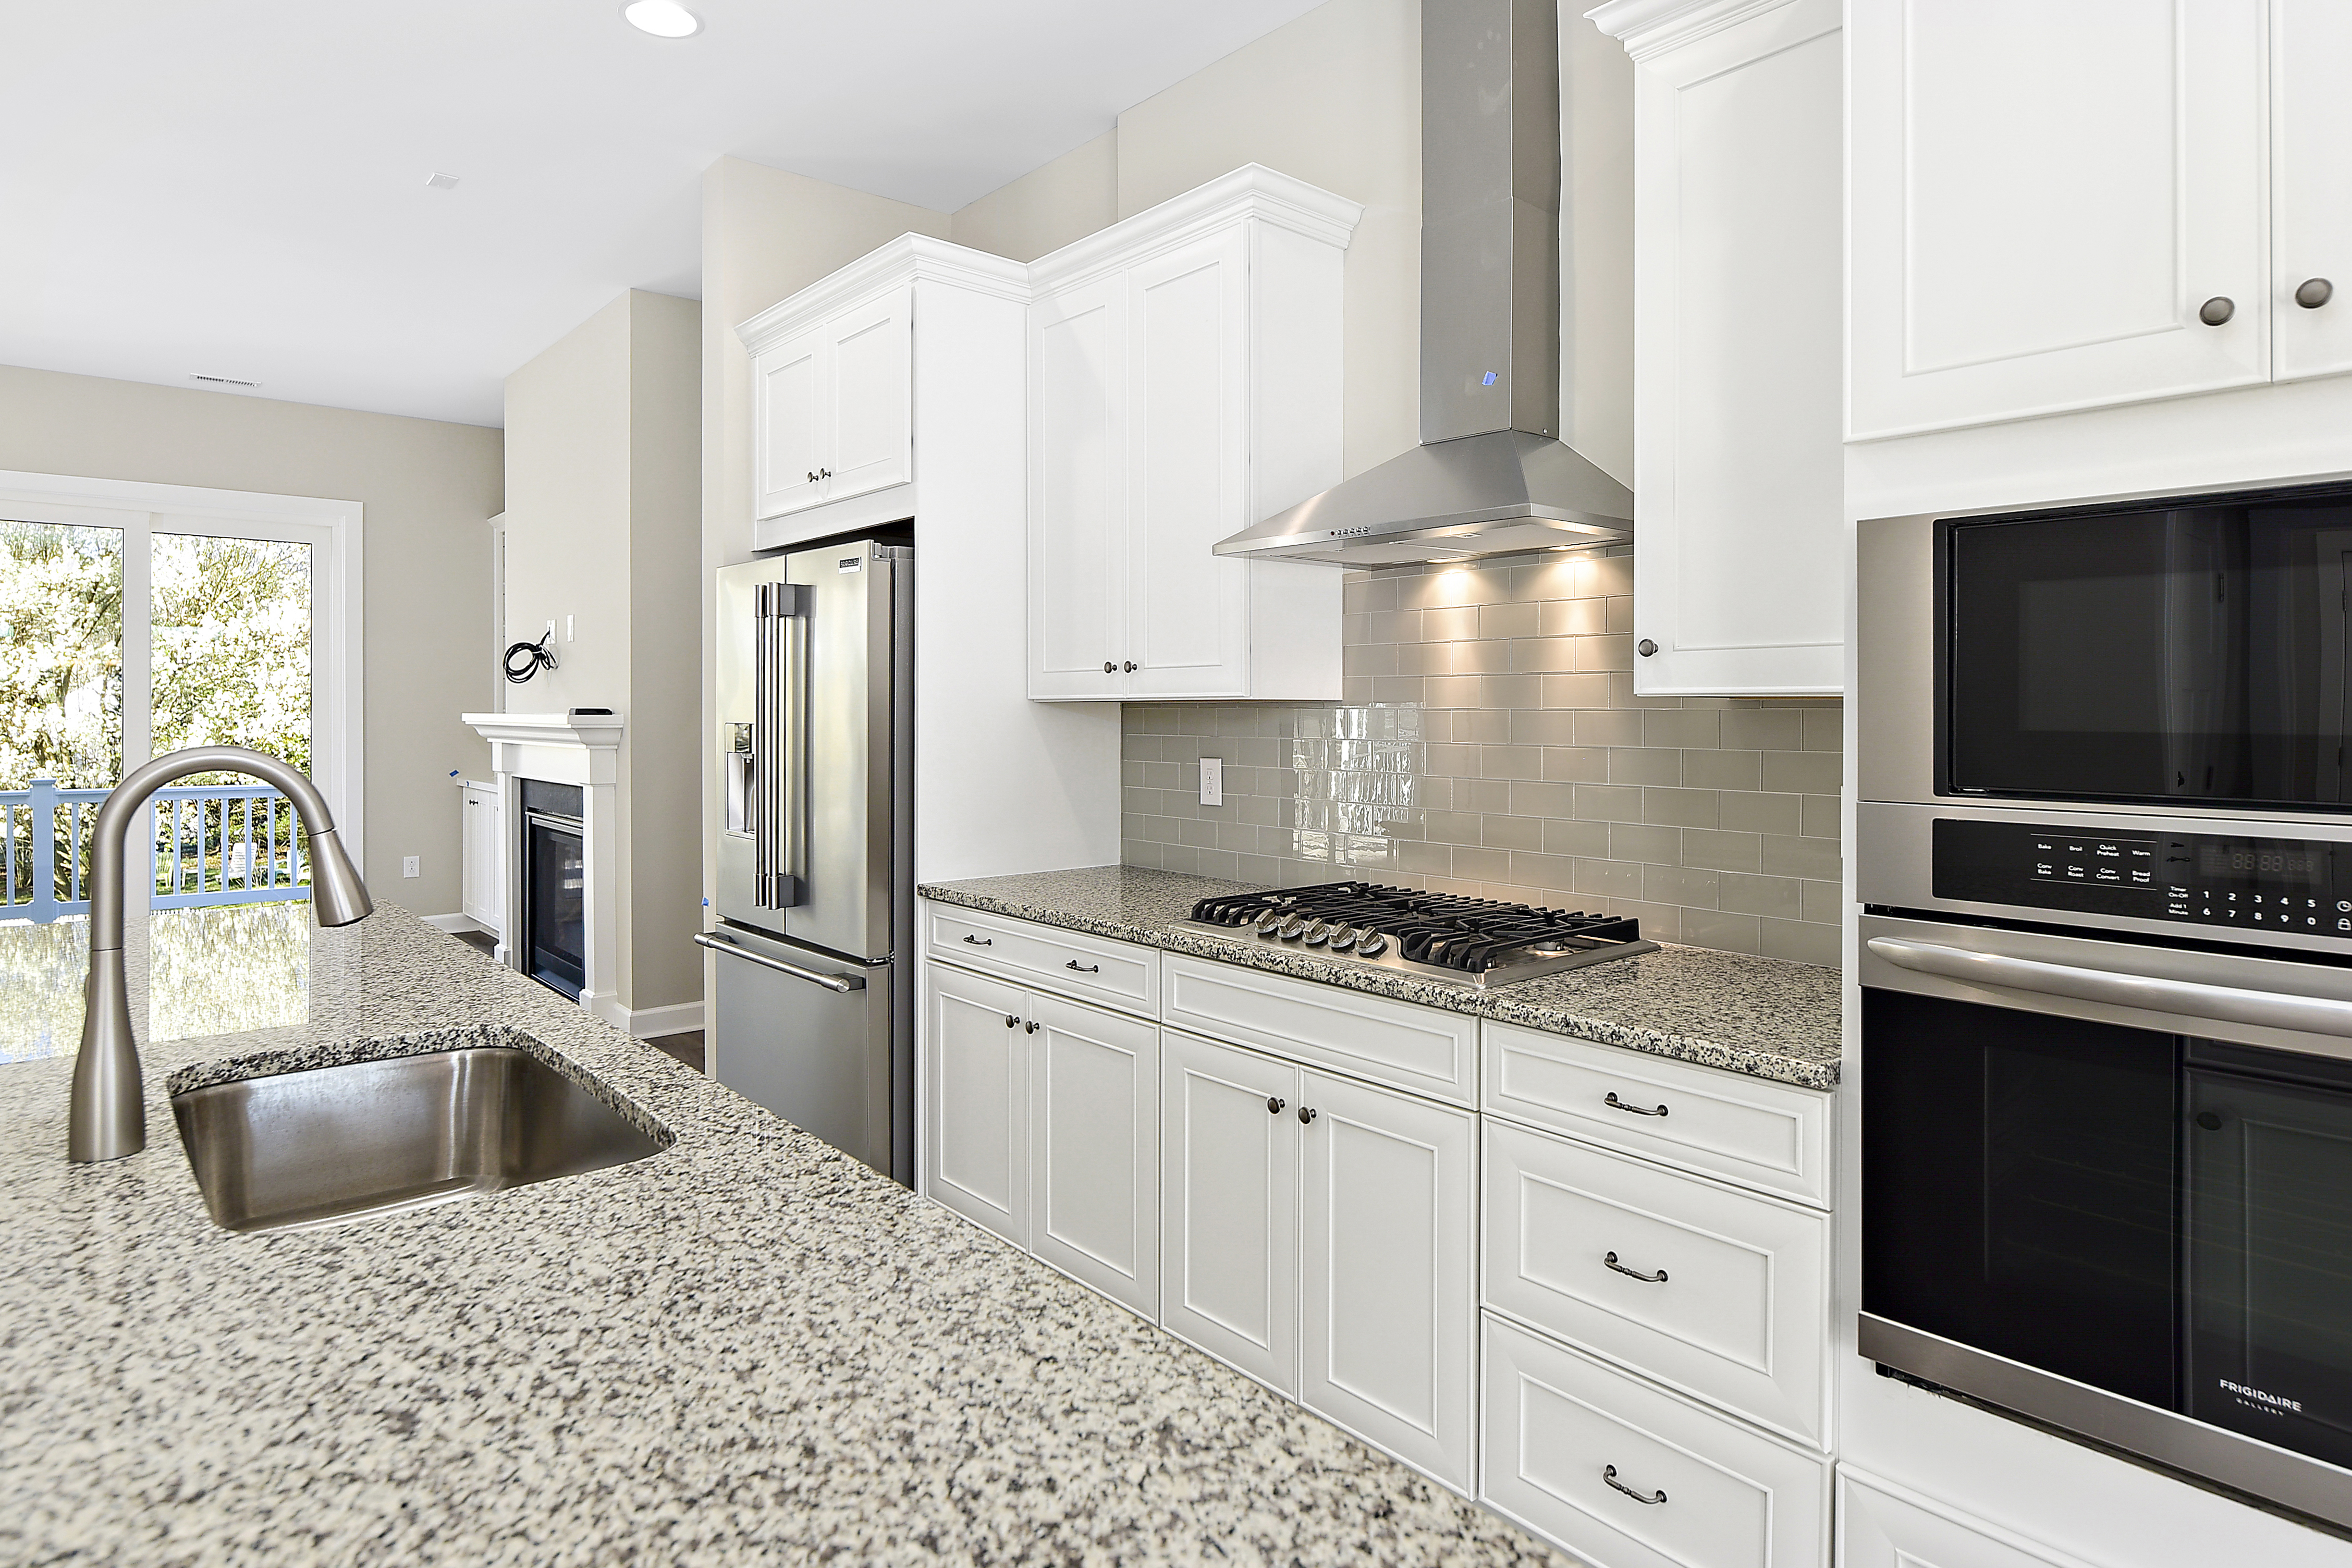 Spacious granite countertops and stainless steel appliances